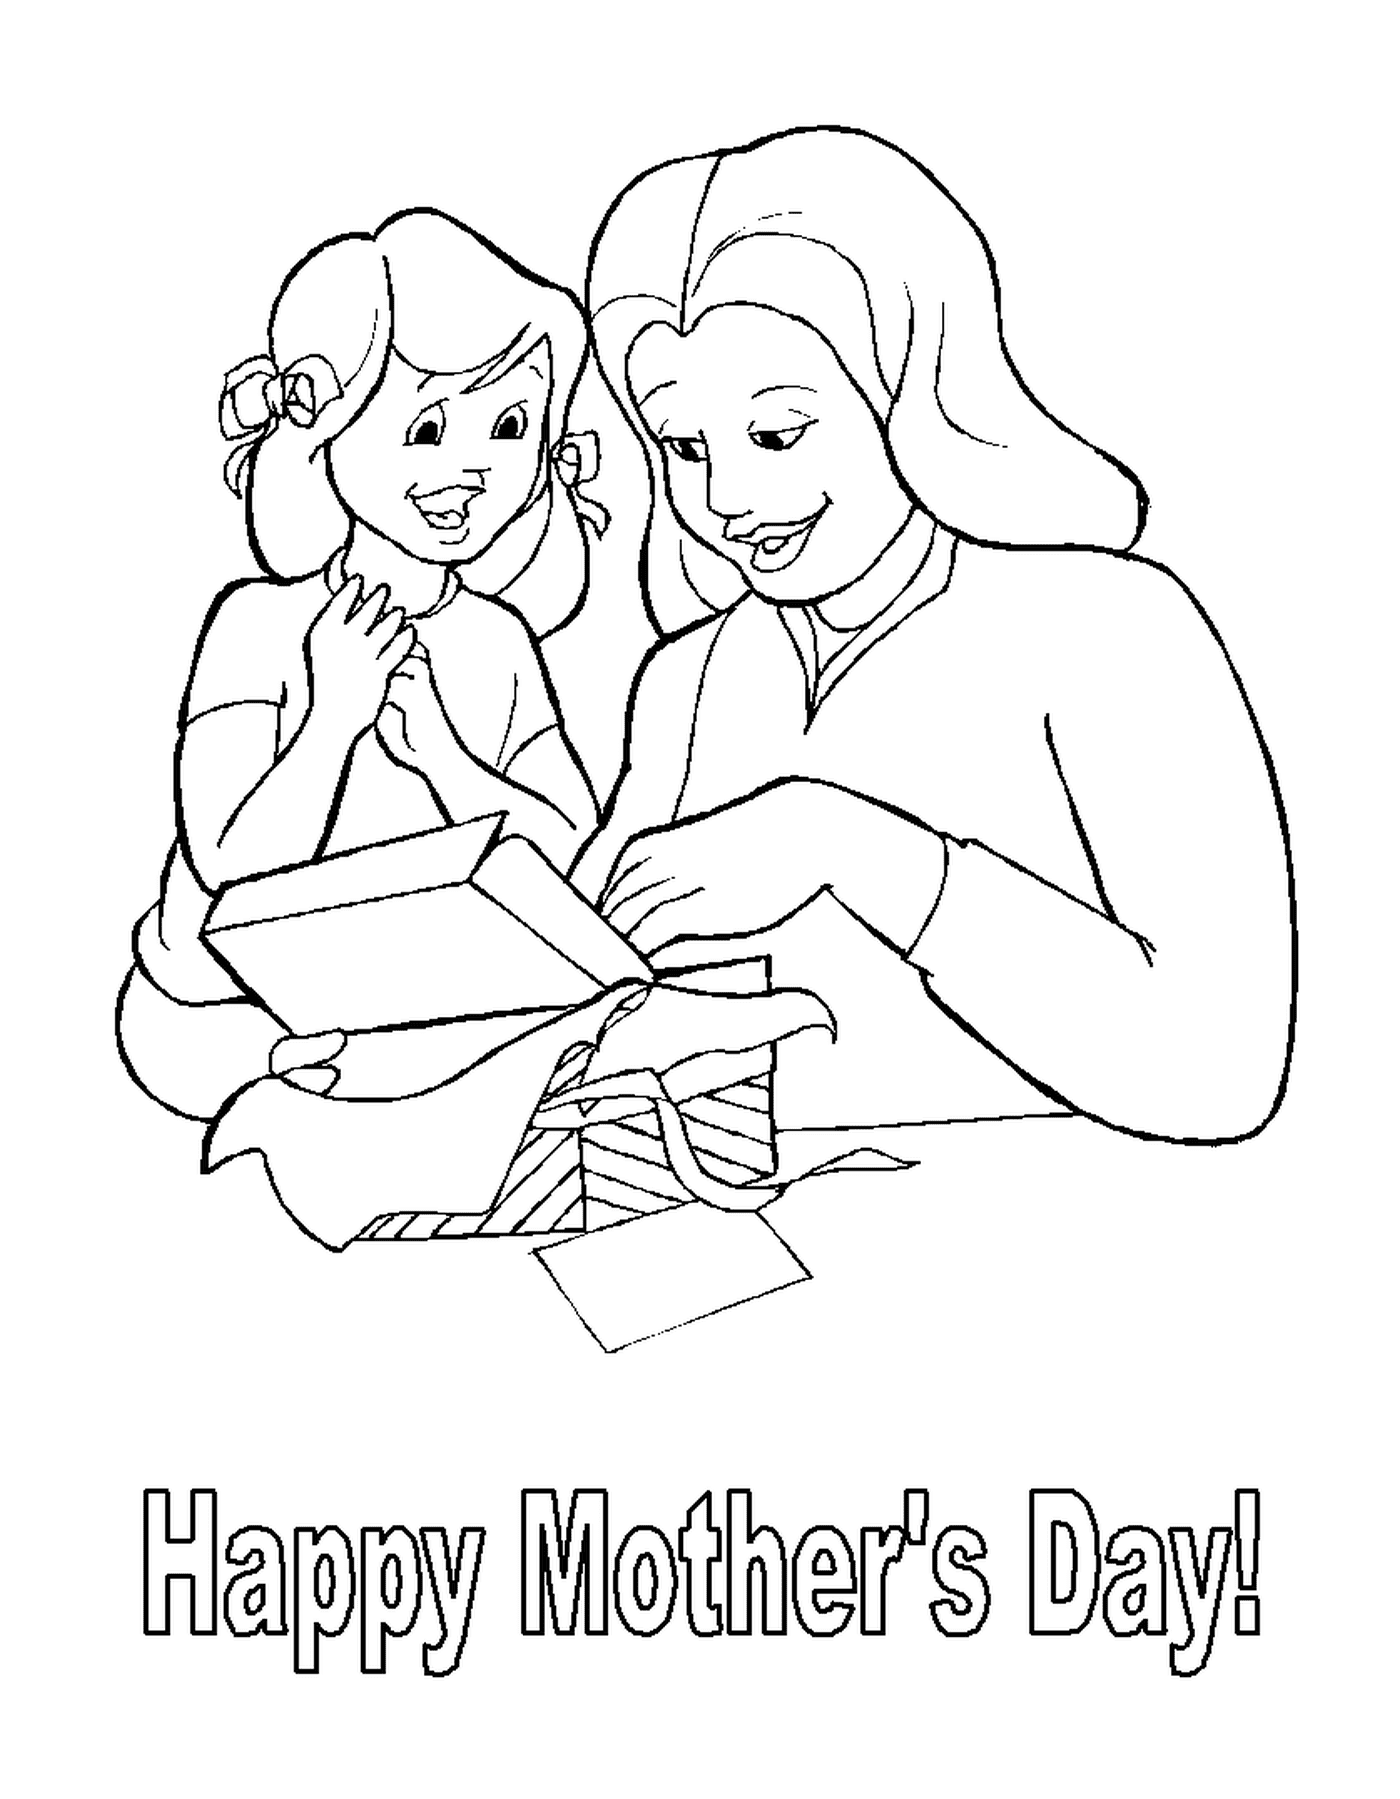  A mother and daughter opening a gift box 